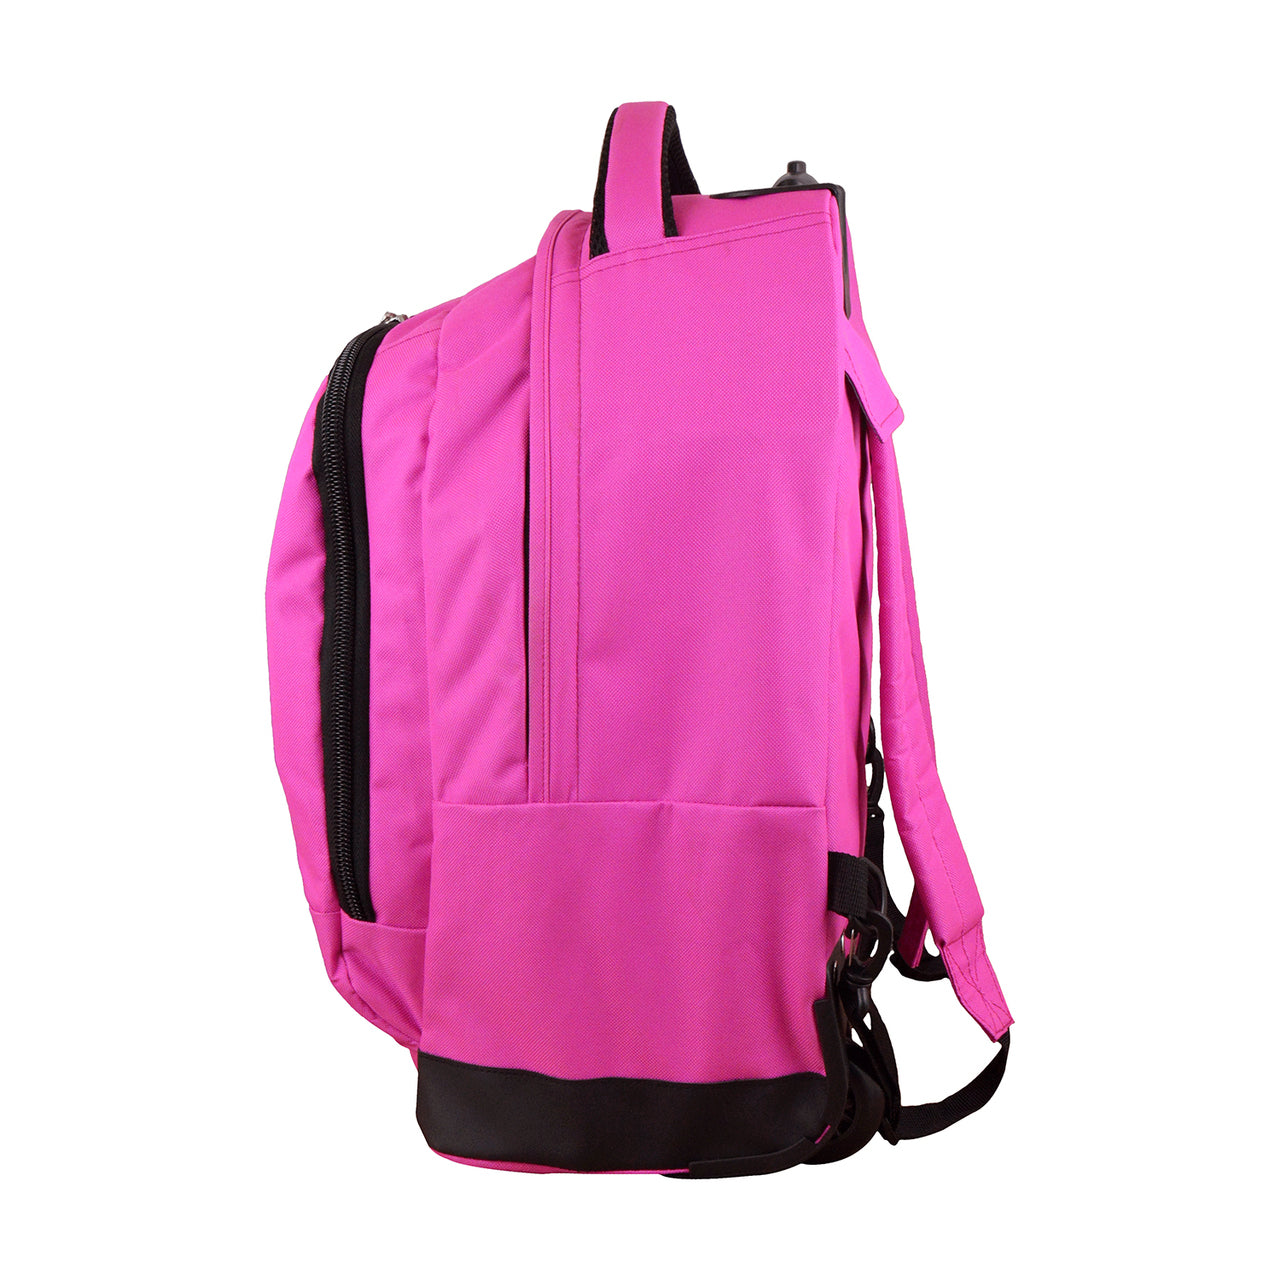 Florida State Premium Wheeled Backpack in Pink